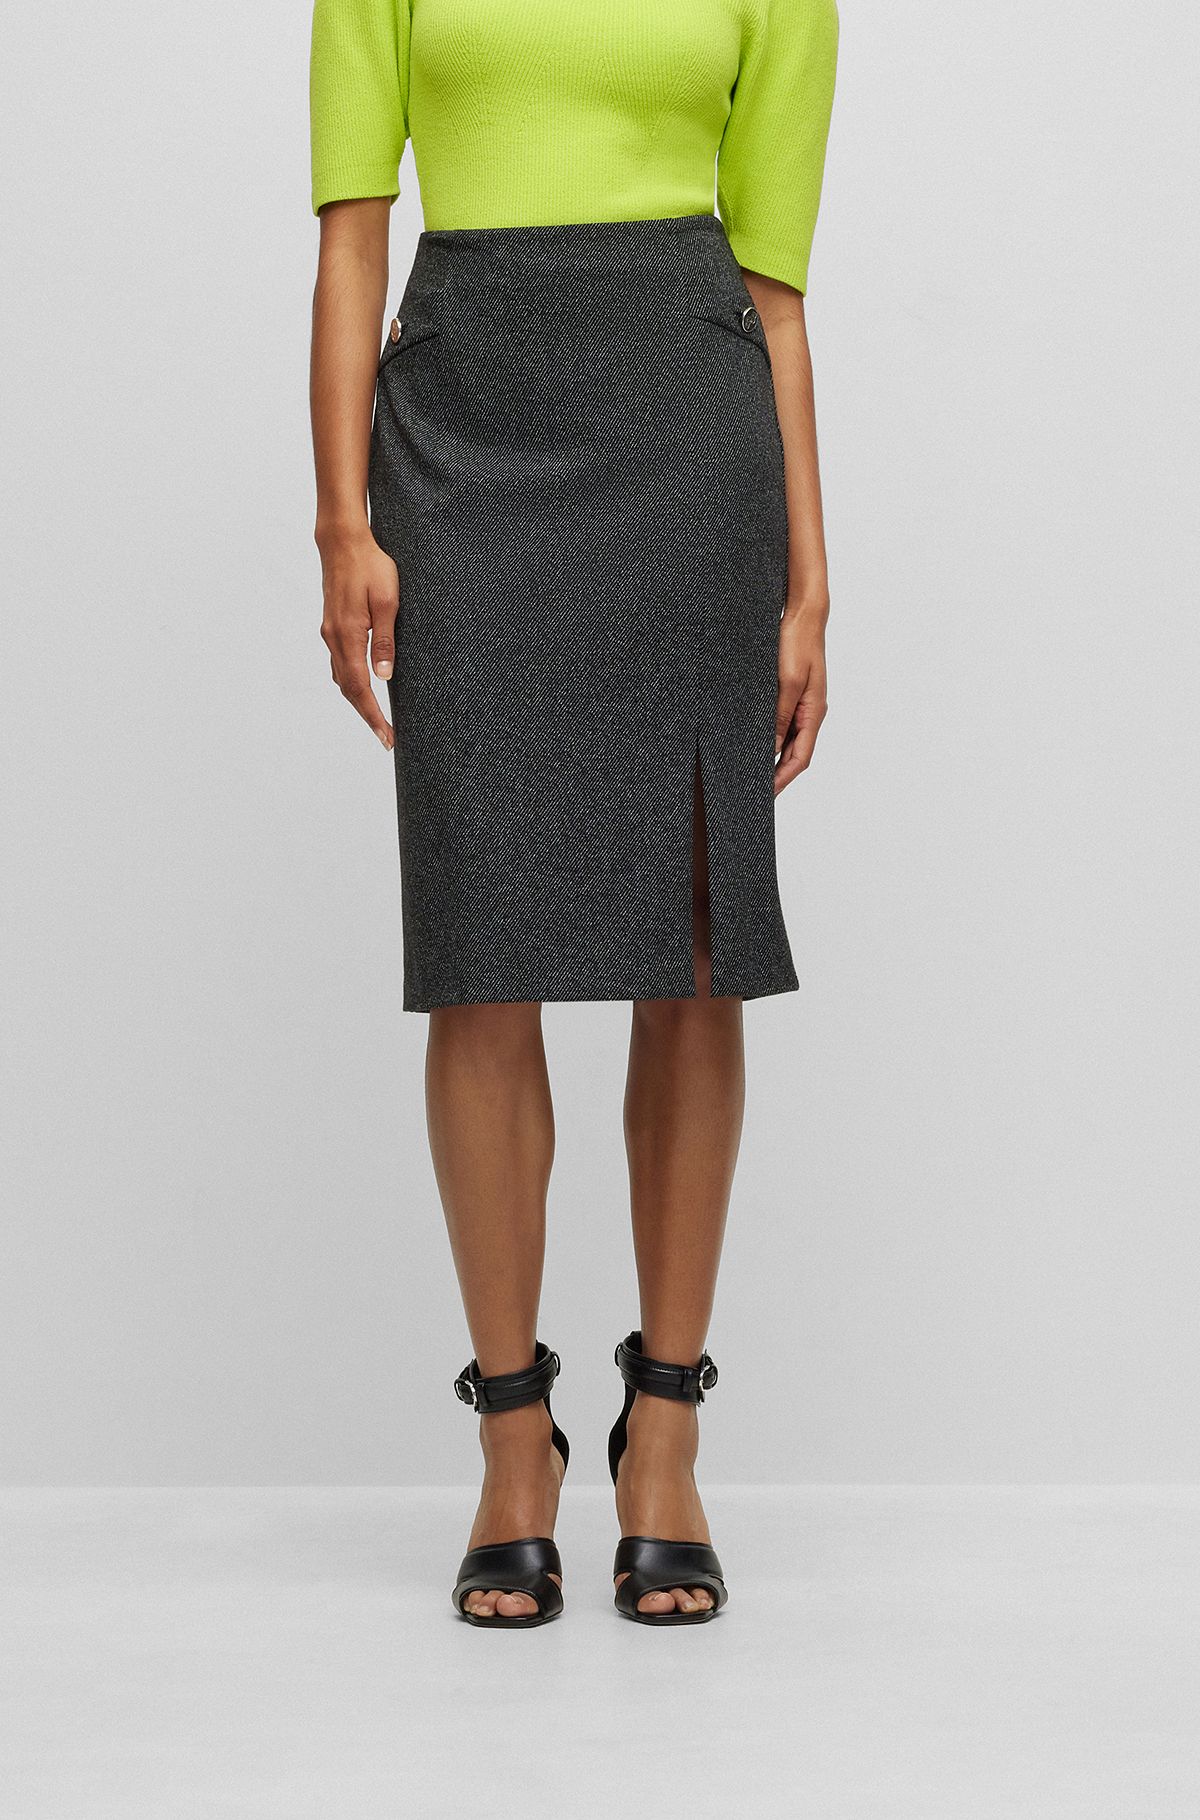 Slim-fit pencil skirt with front slit, Patterned